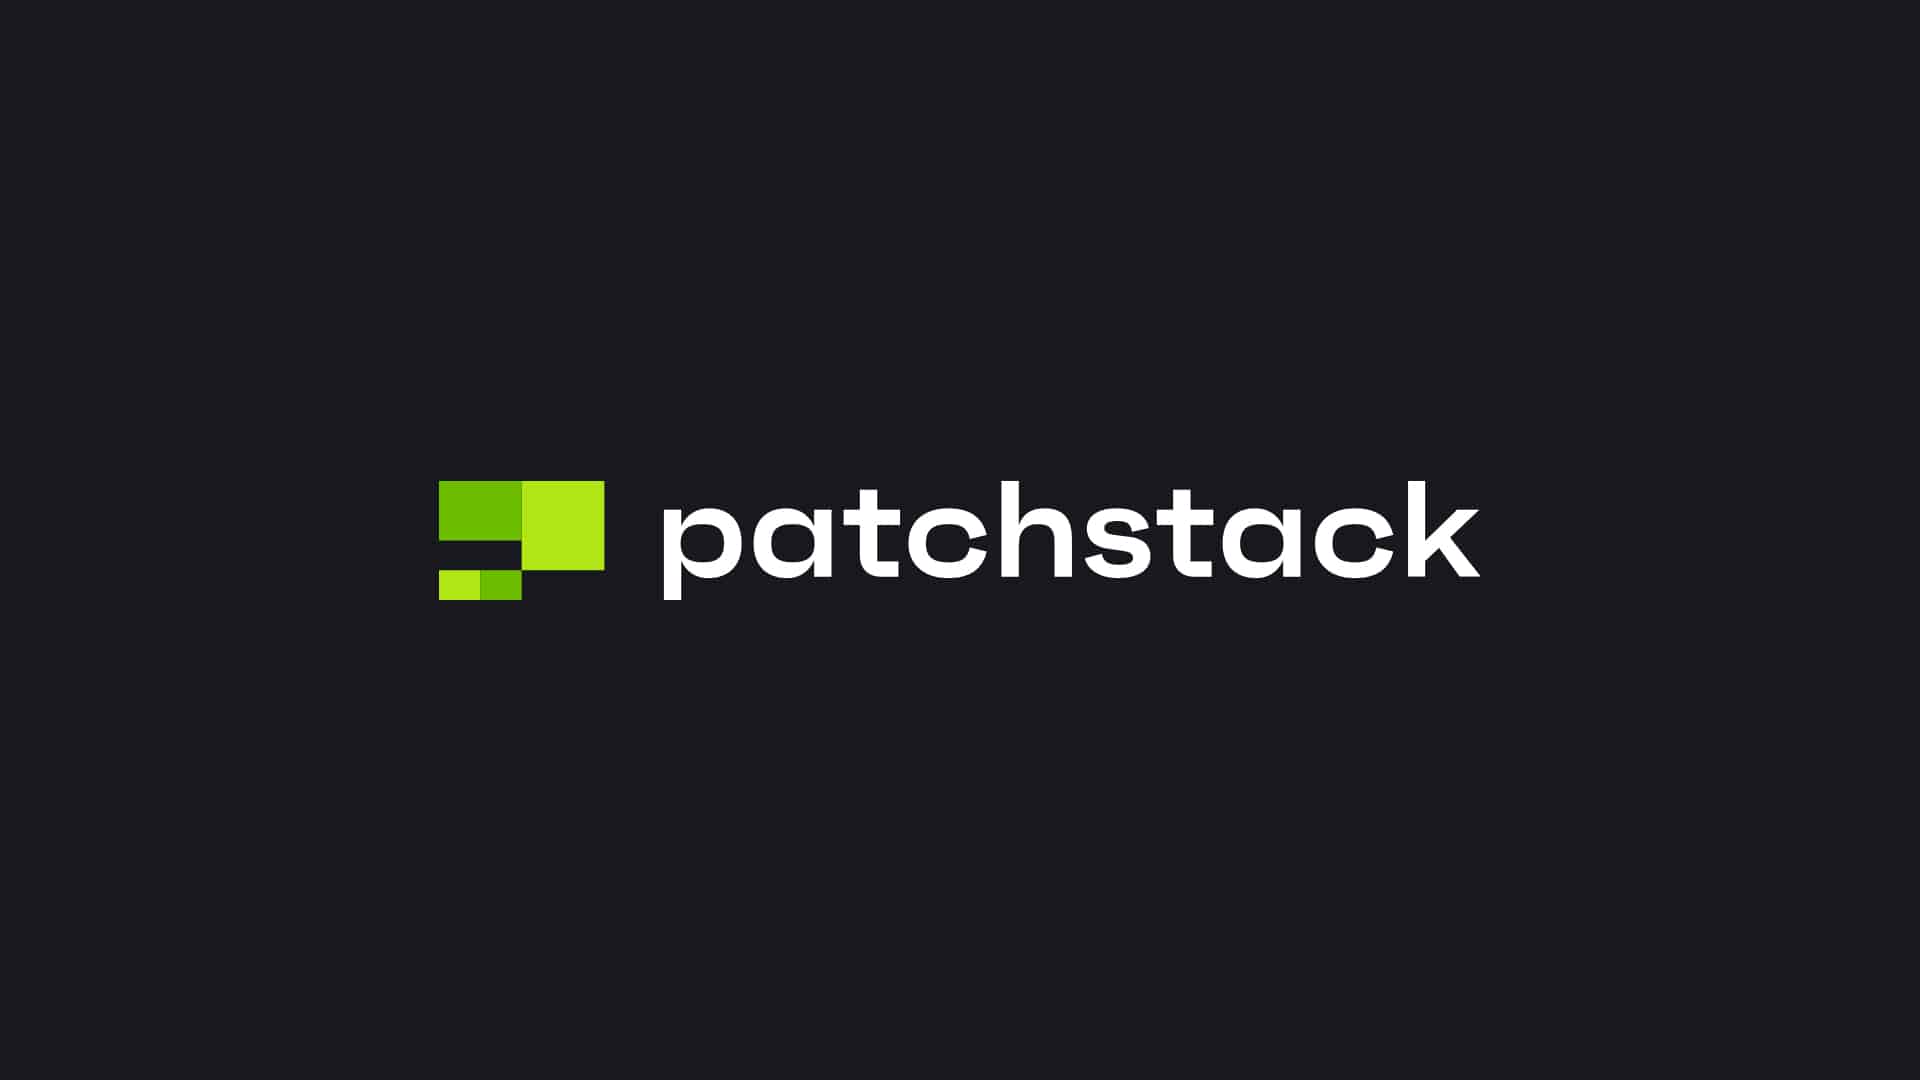 patchstack-whitepaper-wordpress-ecosystem-records-150-increase-in-security-vulnerabilities-in-2021 Patchstack 白皮書：WordPress 生態系統記錄 2021 年安全漏洞增加 150%